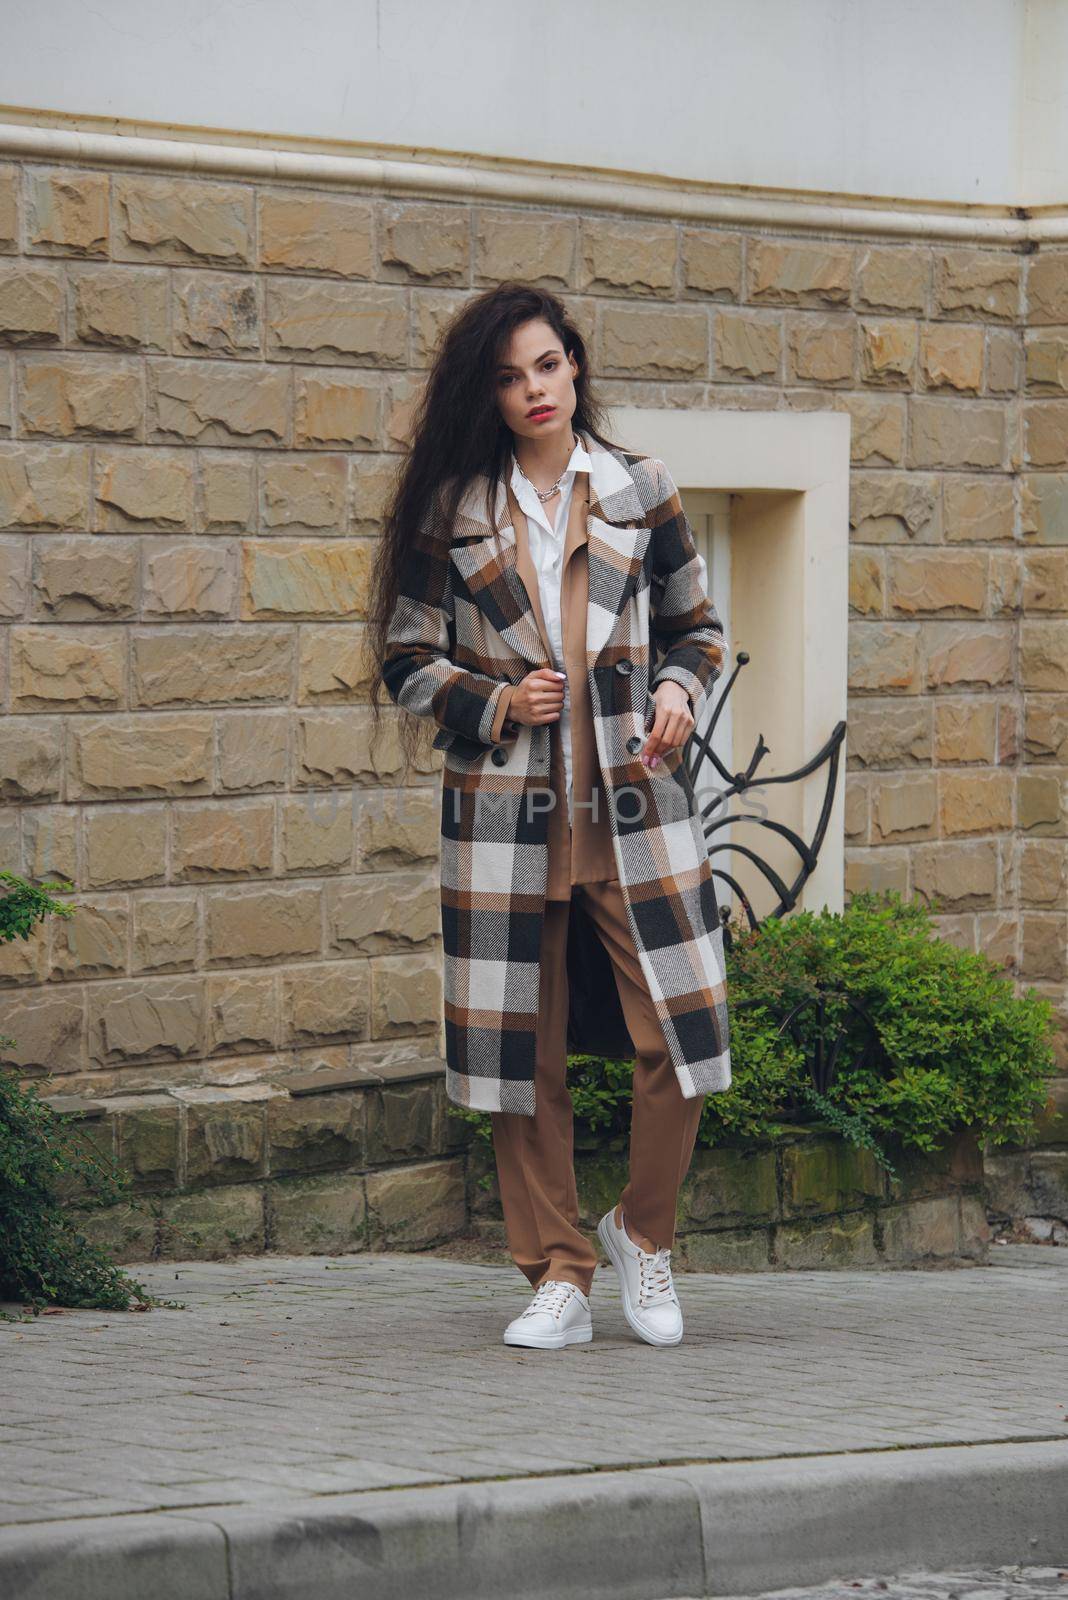 Closeup portrait of young beautiful fashionable woman wearing checkered long coat, beige pants and white blouse . Lady posing on city street. by Ashtray25